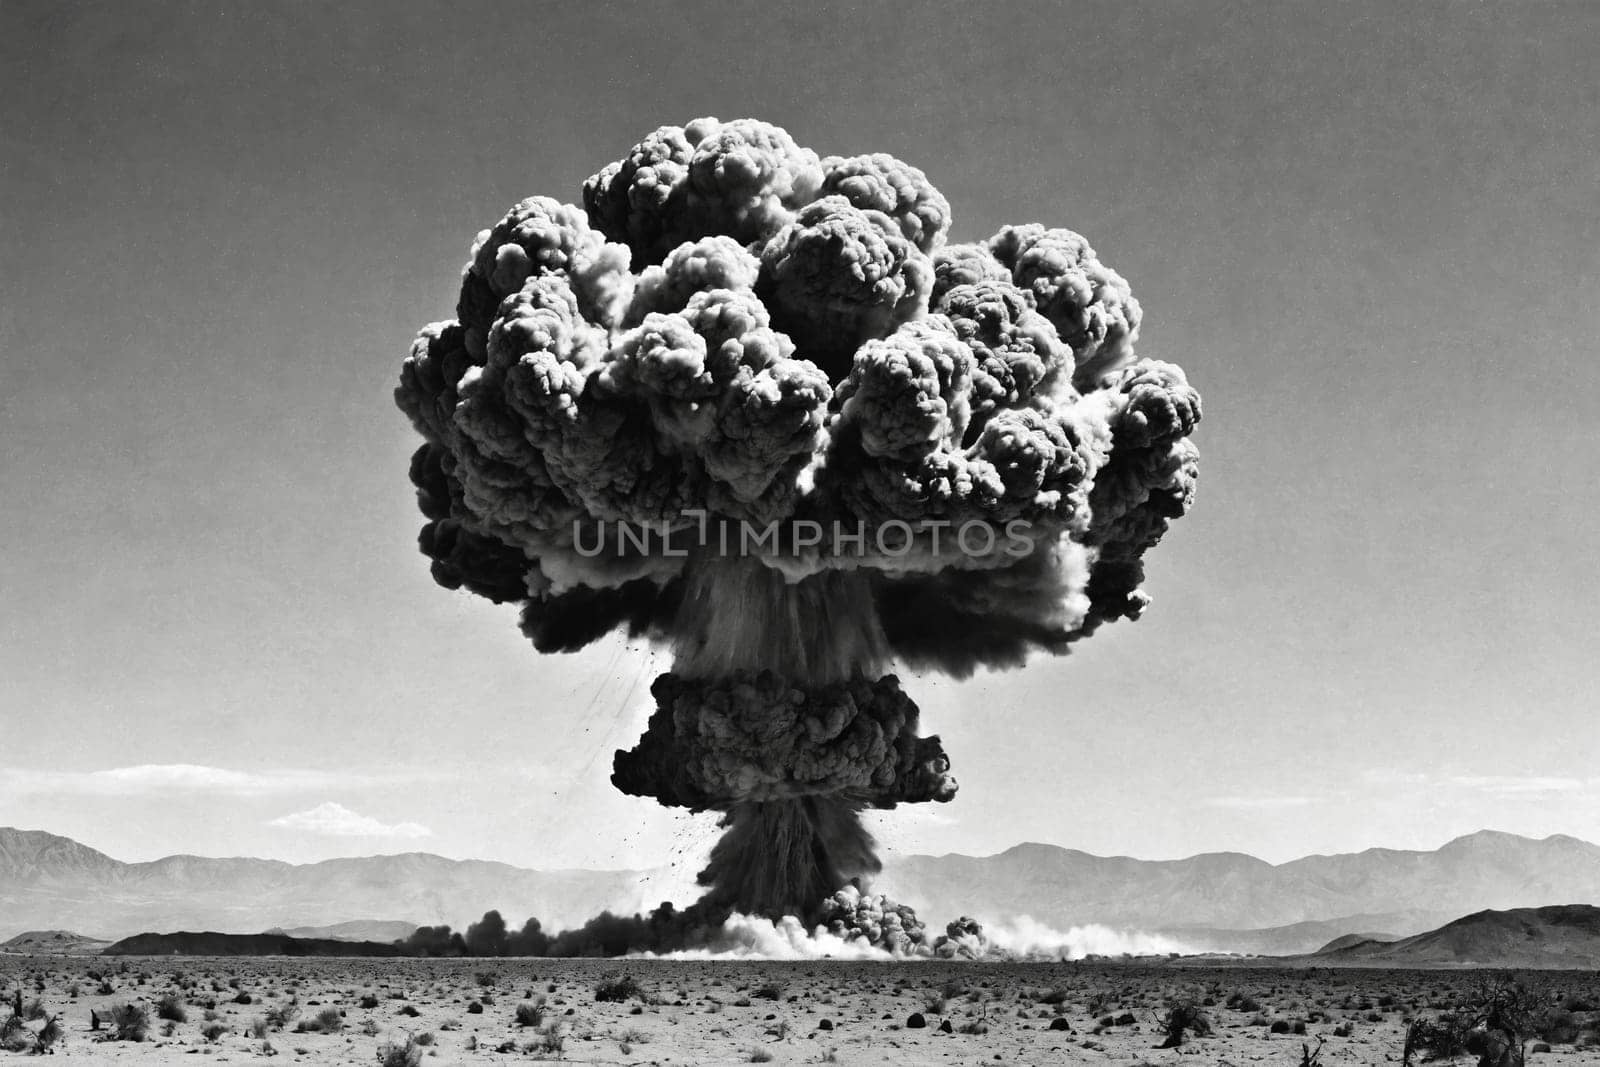 Mushroom Cloud of a Nuclear Explosion Frozen in Time by Andre1ns